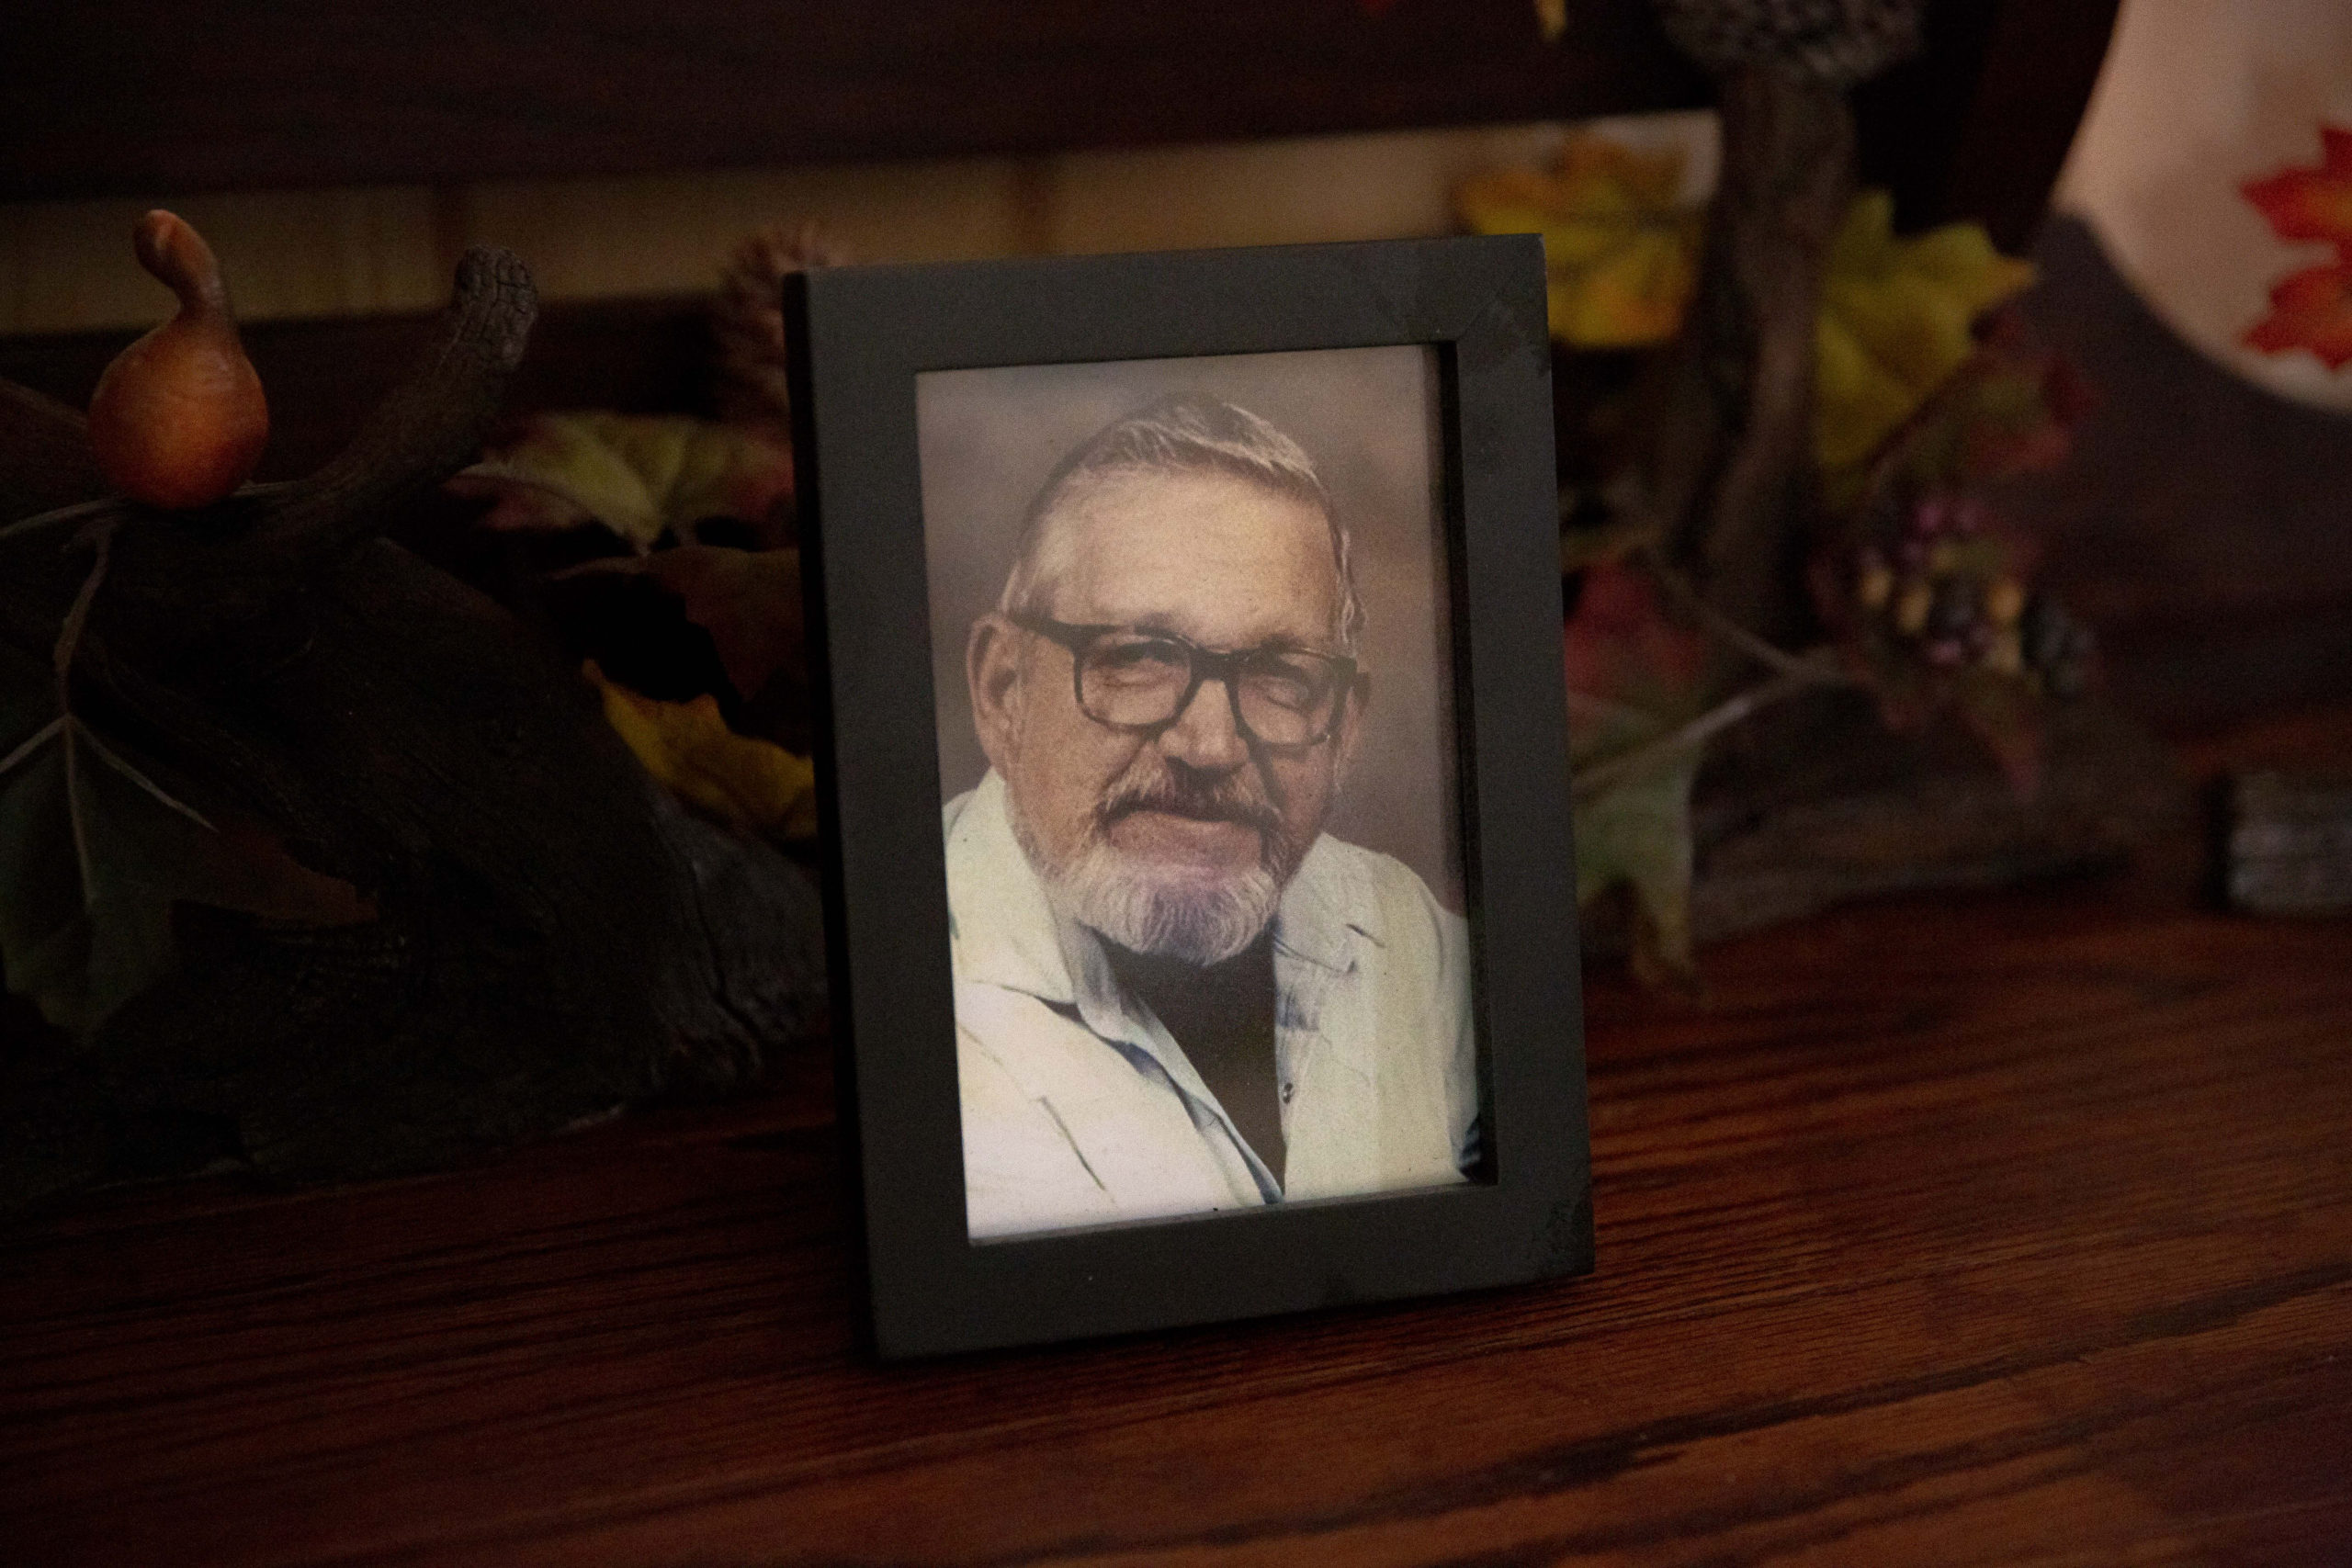 A framed photo of “Bud," as Ancel Freeman was known to friends and family